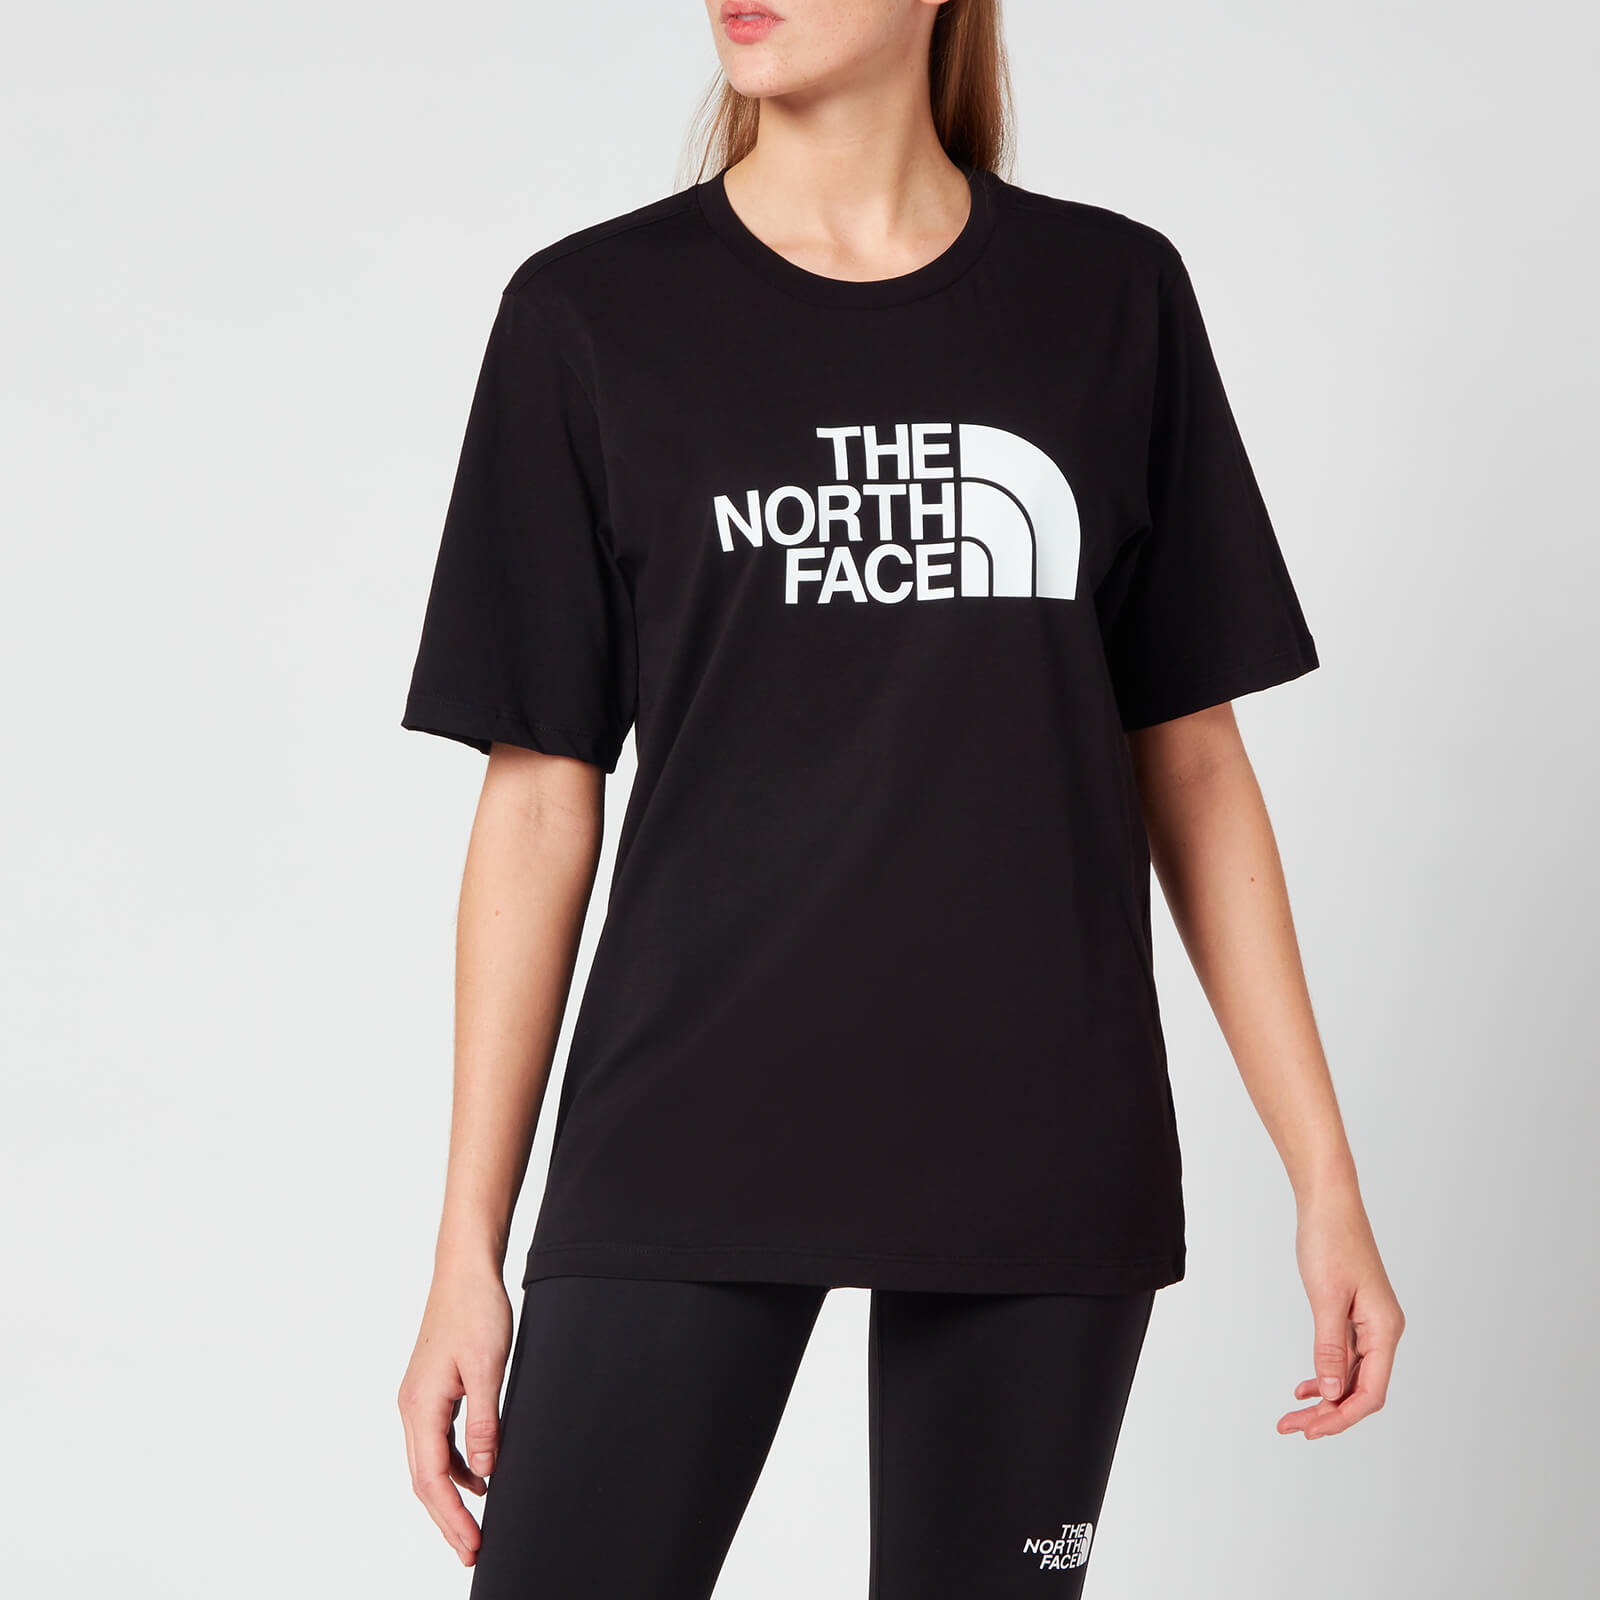 The North Face Women's Bf Easy T-Shirt - Black - M